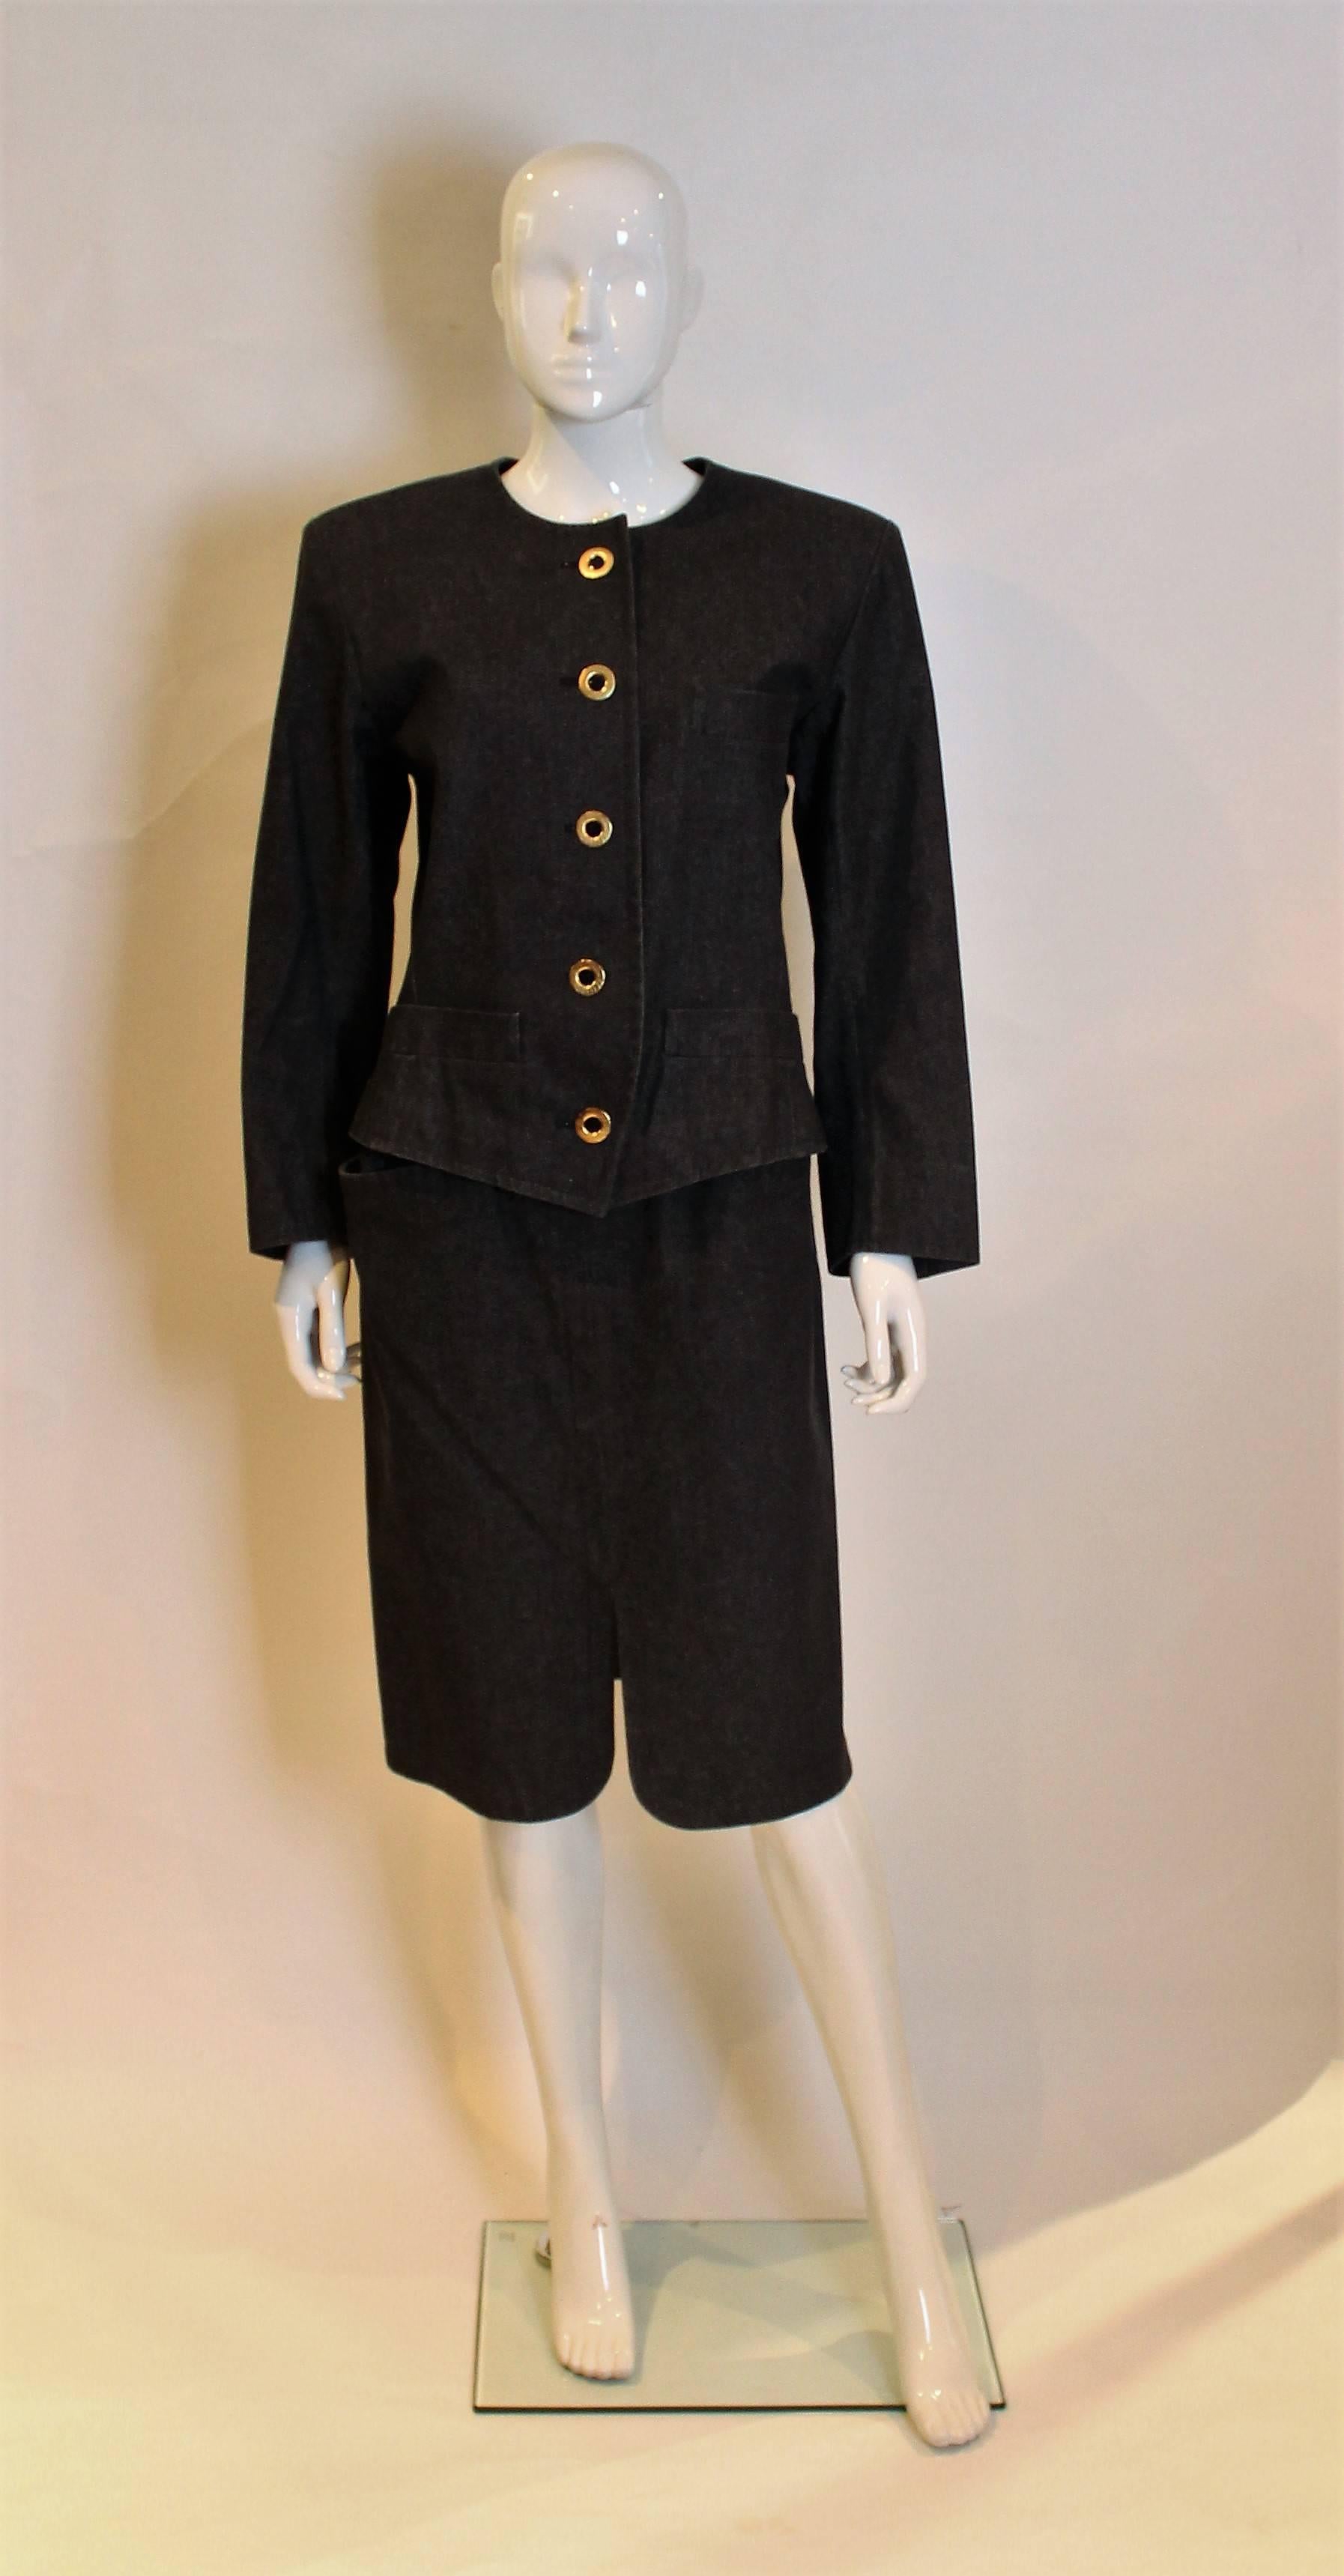 A great suit for Spring. This black skirt suit  has a round necked jacket with 5 button front opening. It has 3 buttons on each cuff, one breast pocket on the left hand side and 2 pockets at hip leval. The skirt has a zip opening on the left hand